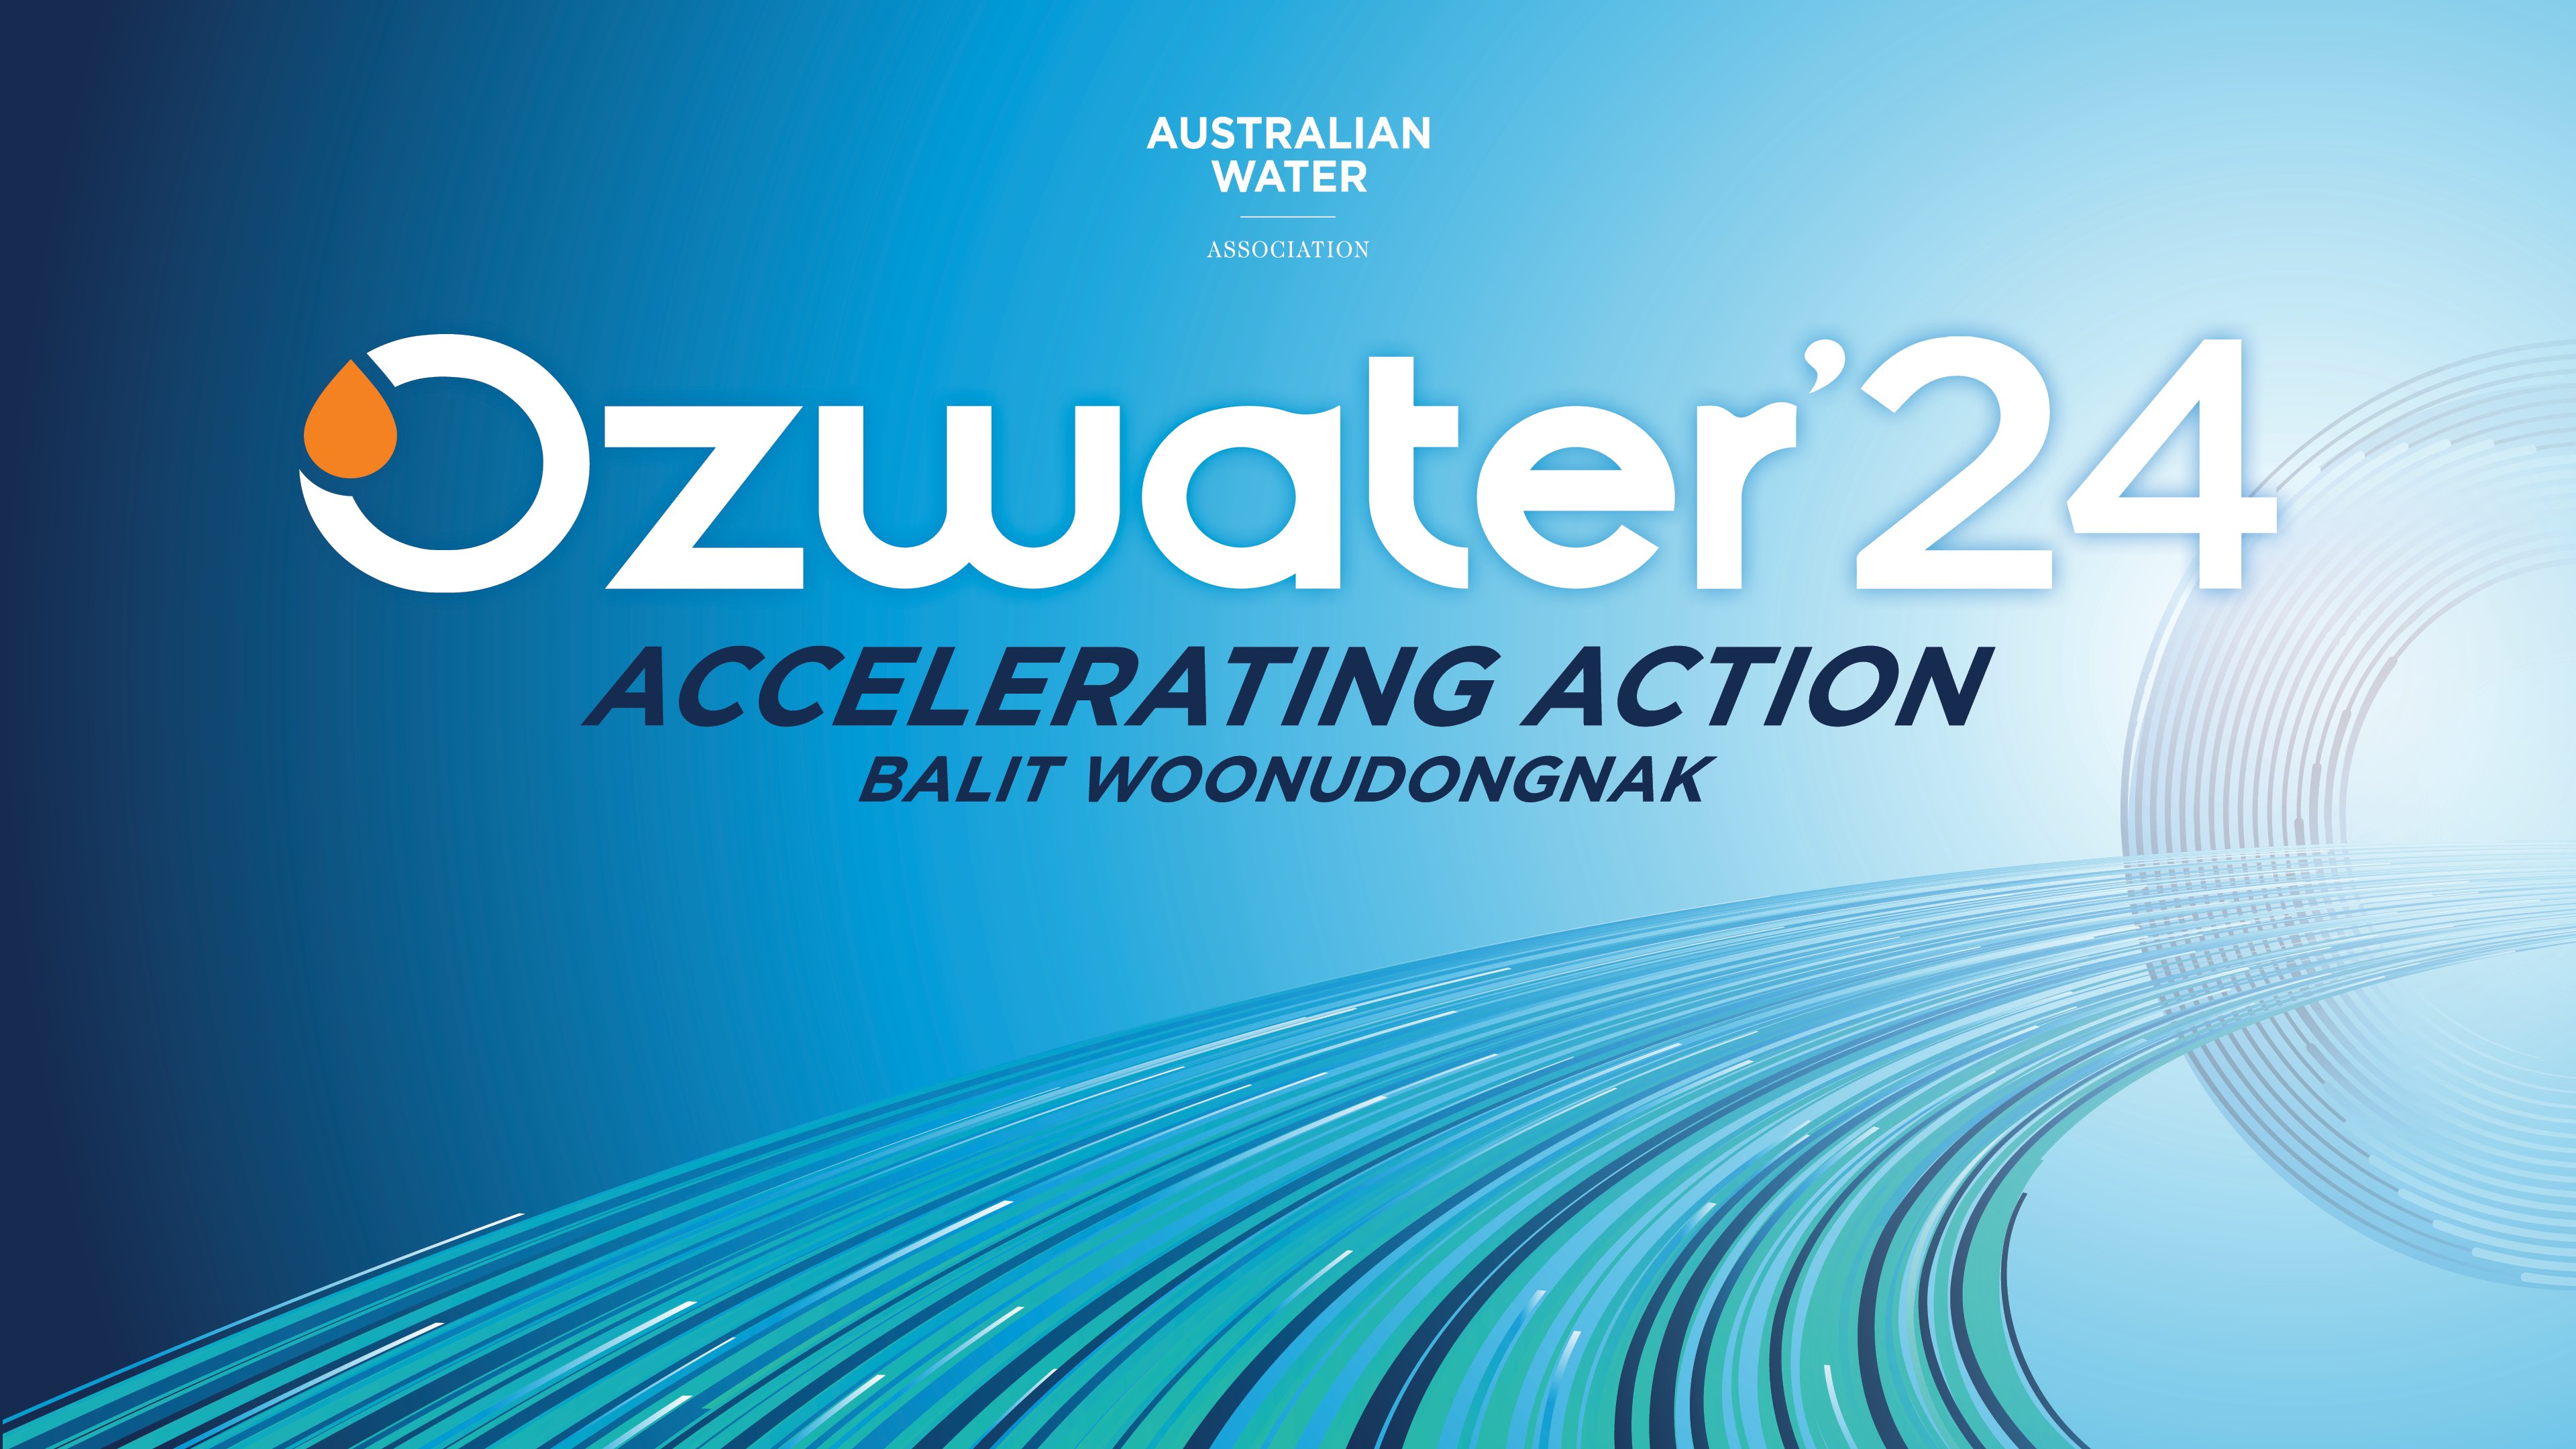 OZWATER24 